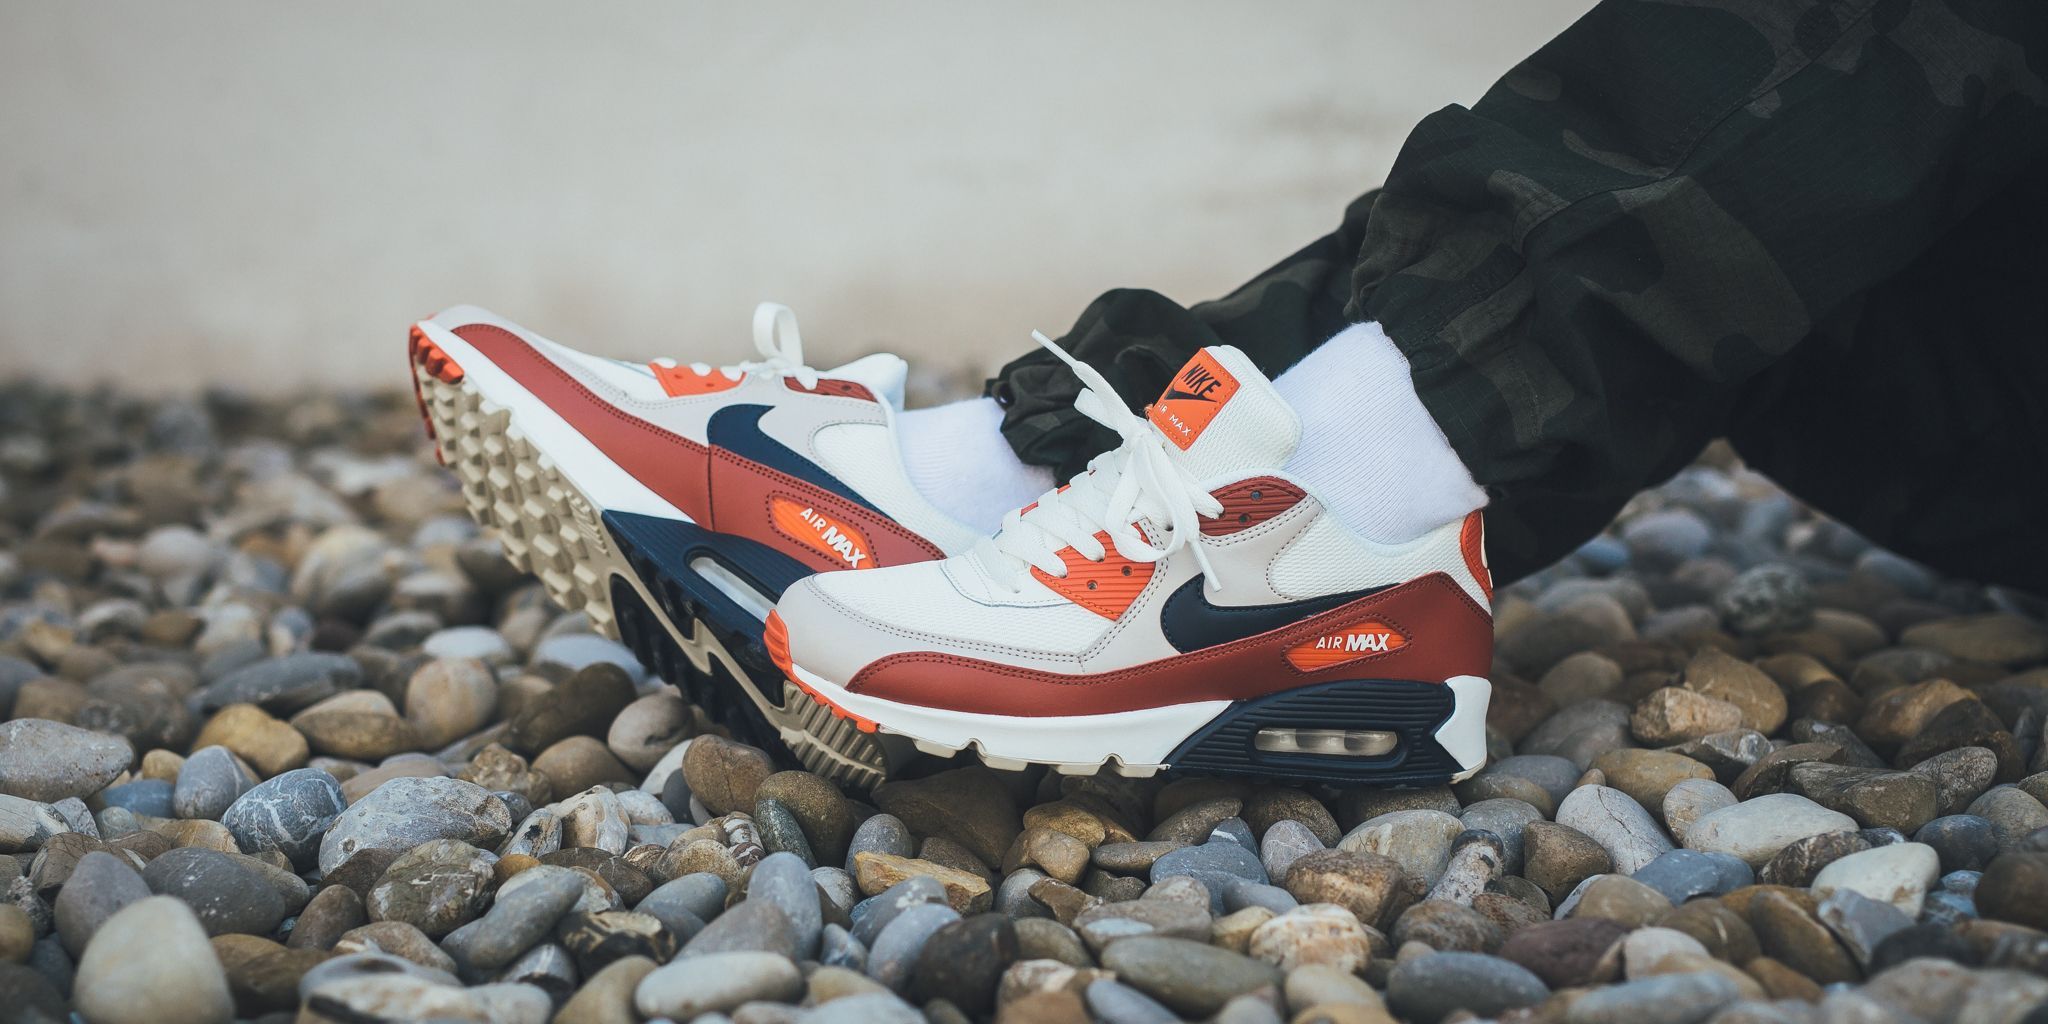 A rayas cálmese más lejos Titolo on Twitter: "#newarrival Nike Air Max 90 Essential - Mars Stone/ Obsidian-Vintage Coral SHOP HERE ➡️ https://t.co/wy9jQ7yqkm #nike #am90  #marsstone #airmax90 https://t.co/yPFQxDwpX2" / Twitter